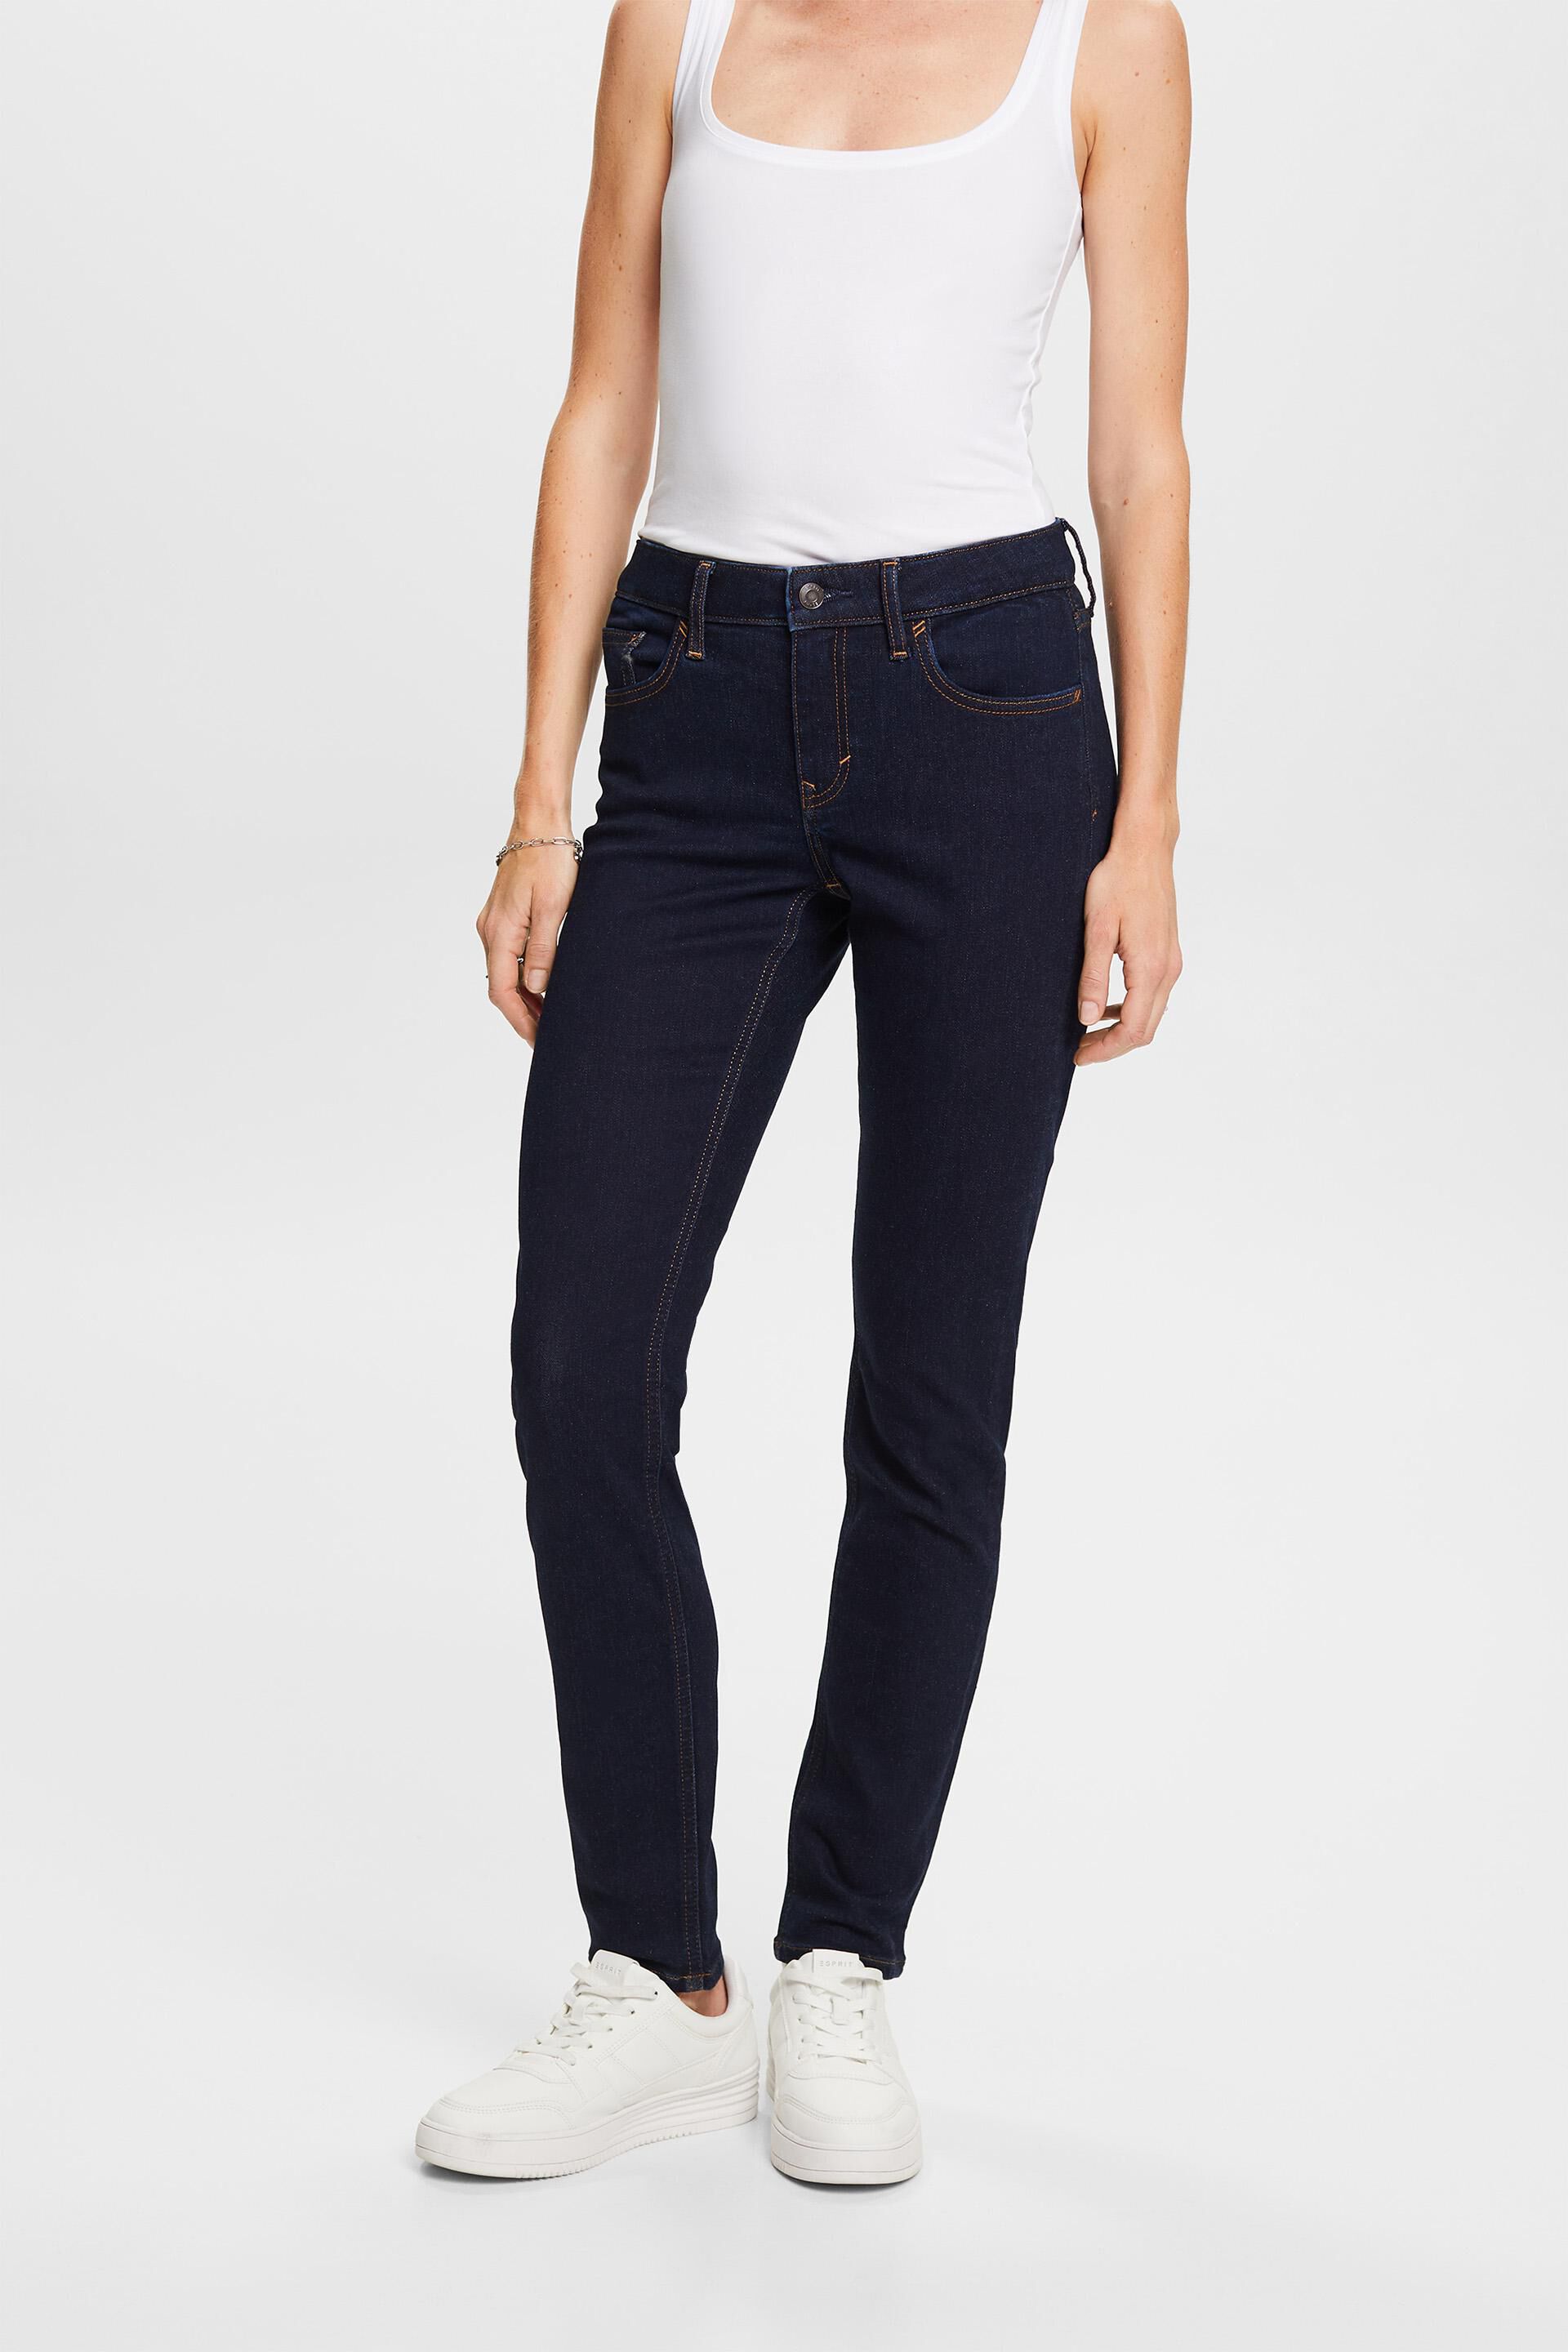 Esprit slim jeans fit Recycled: mid-rise stretch